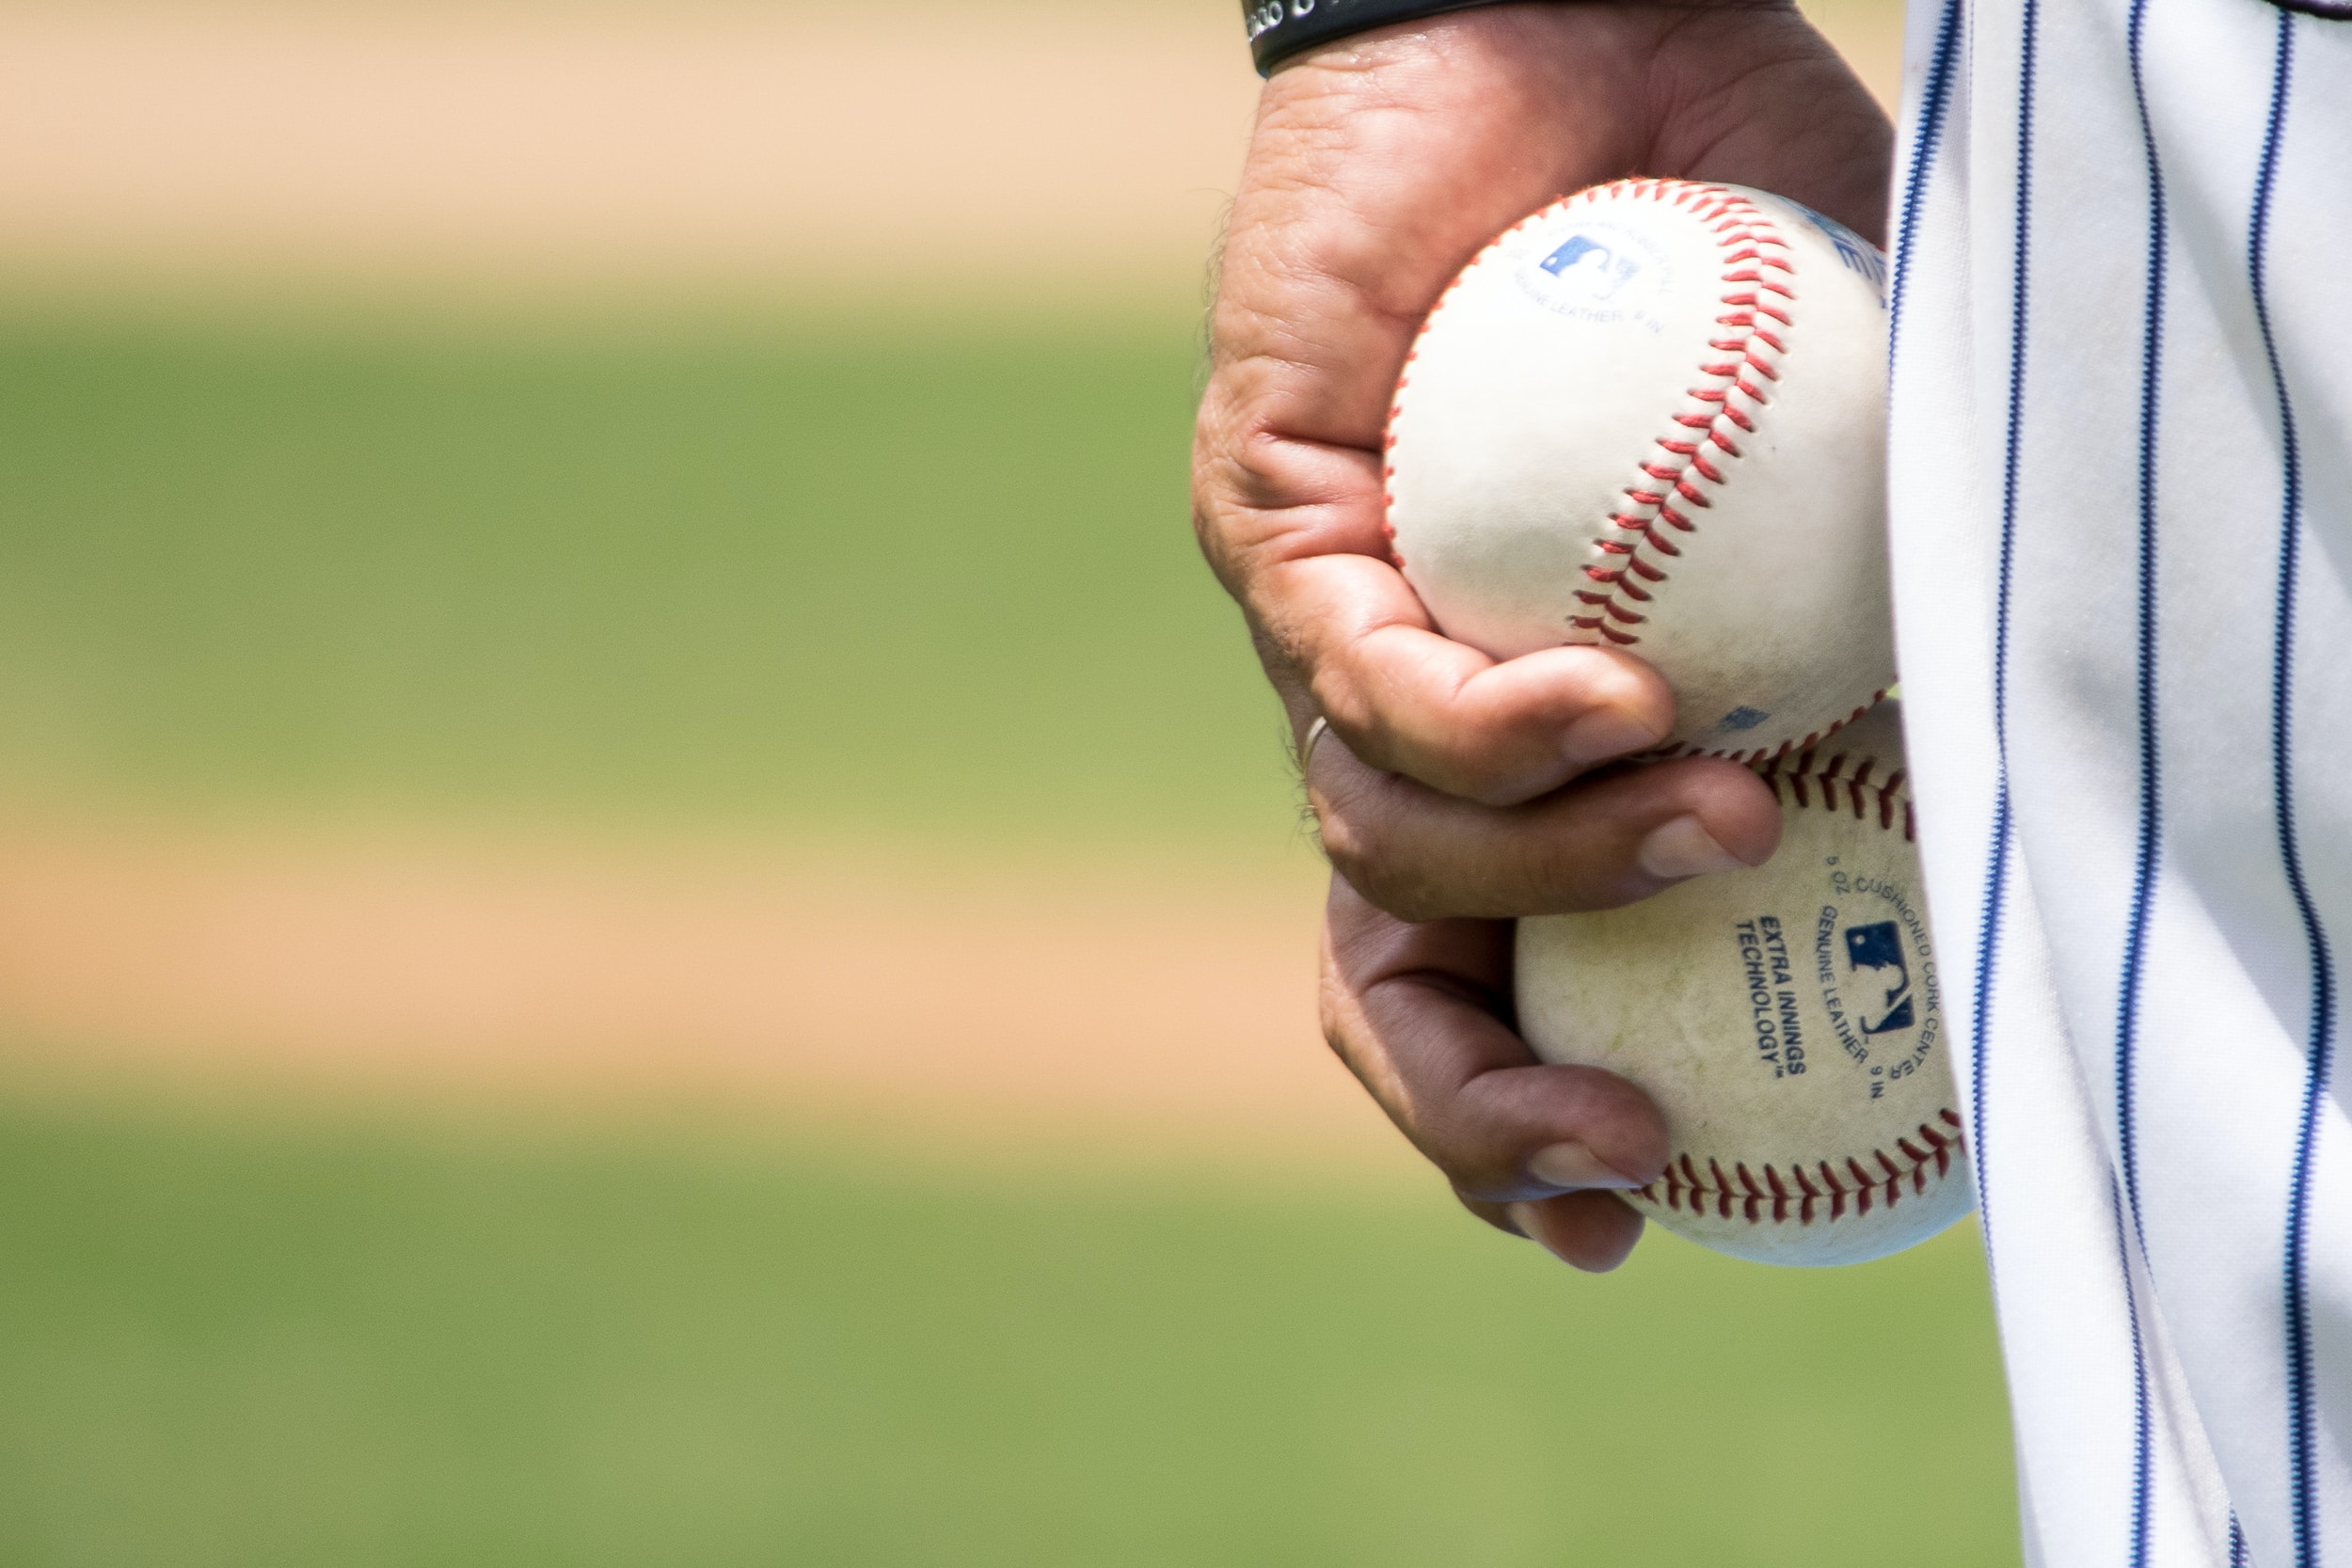 A picture of a baseball player holding two baseballs.